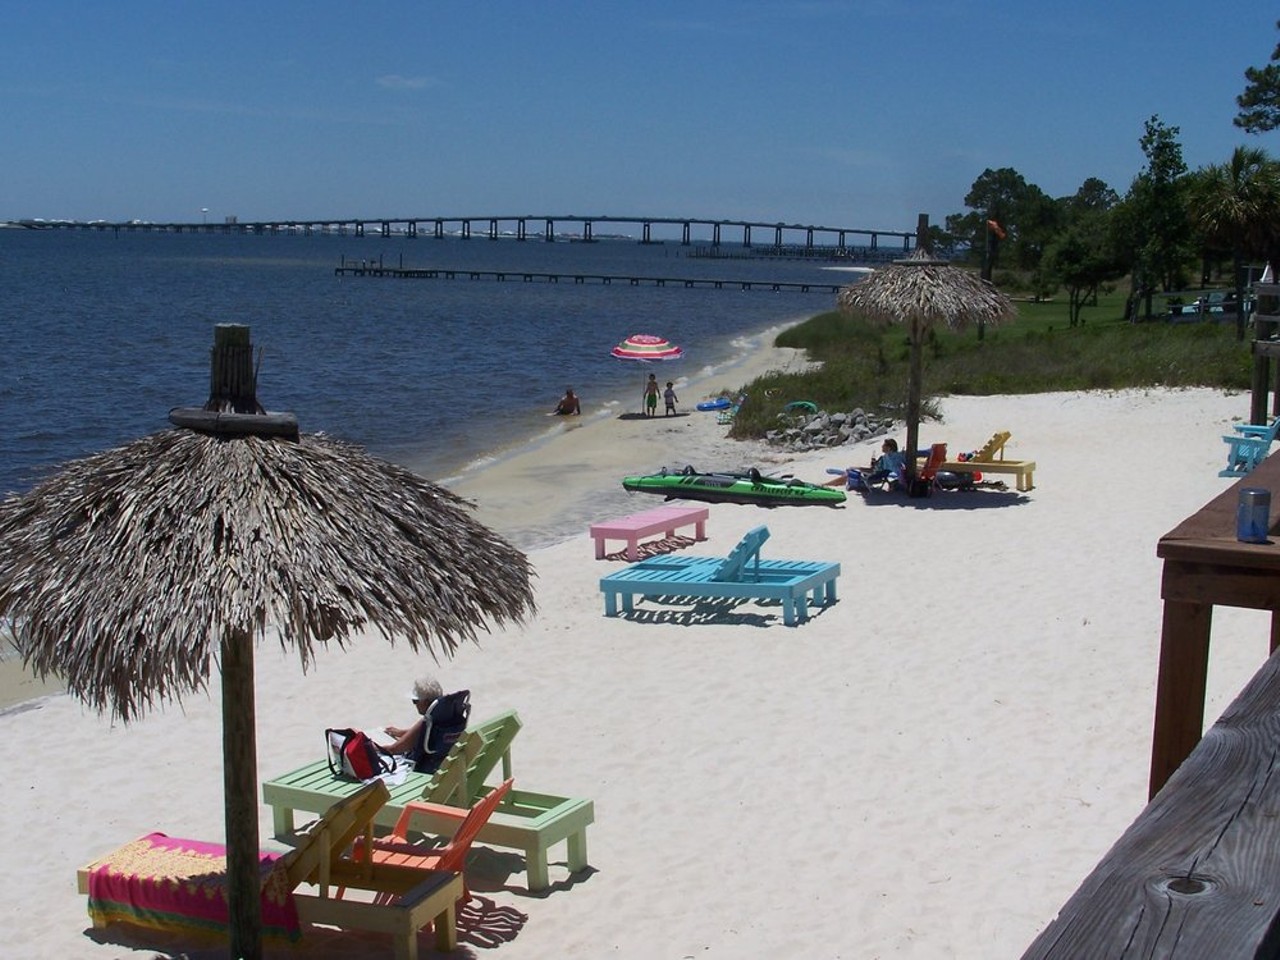 Emerald Beach RV Park
8885 Navarre Parkway, Navarre
The cost of setting up your very own vacay at Emerald Beach RV Park varies from $40 to $695, depending on the site and time of stay.